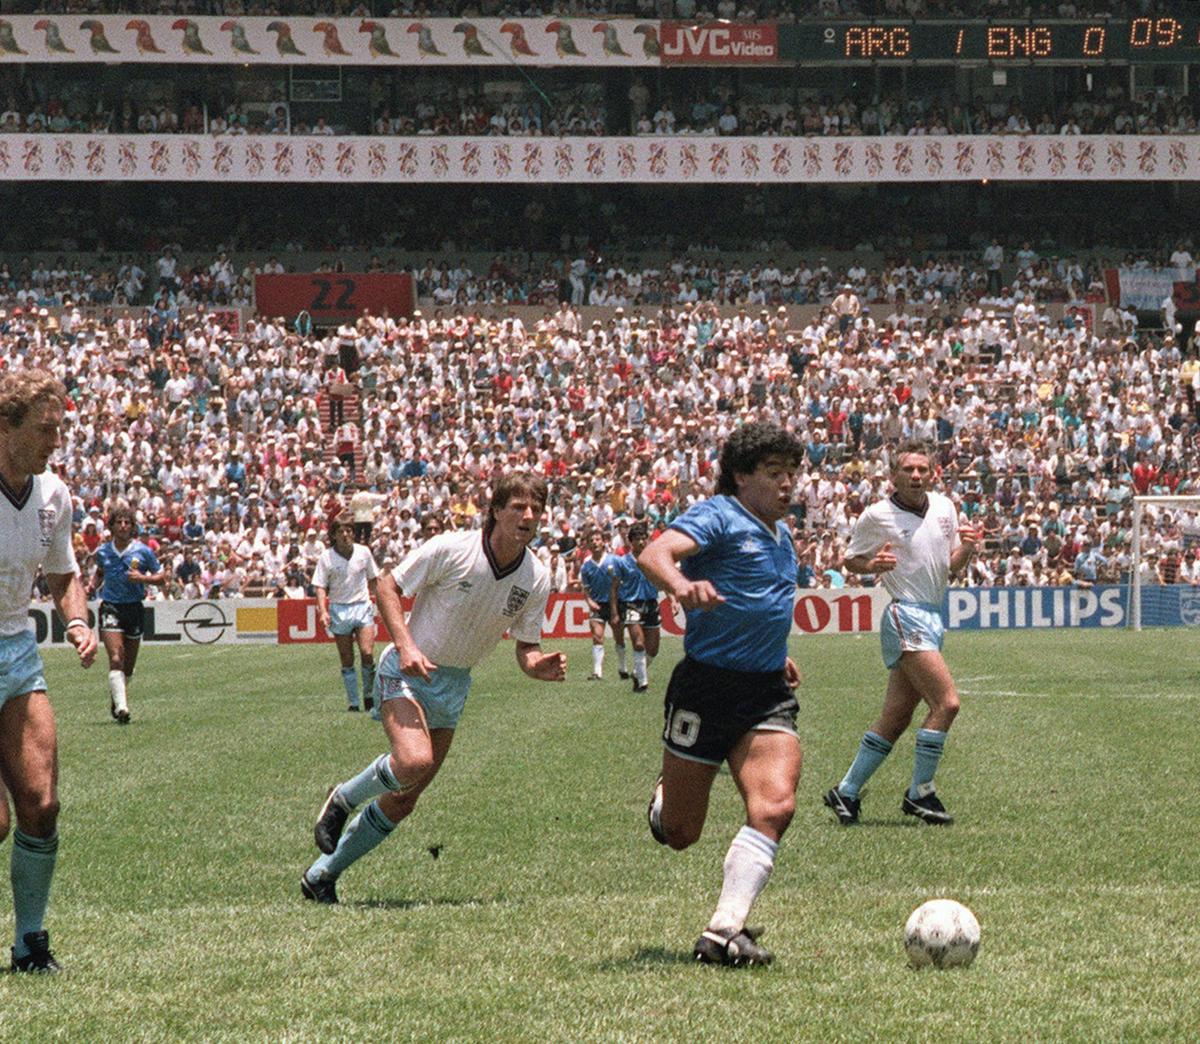 Argentinian forward Diego Armando Maradona runs past English defenders Terry Butcher (L) and Terry Fenwick (2nd L) on his way to scoring his second goal during the World Cup quarterfinal soccer match between Argentina and England 22 June 1986 in Mexico City. (AFP/Getty Images)